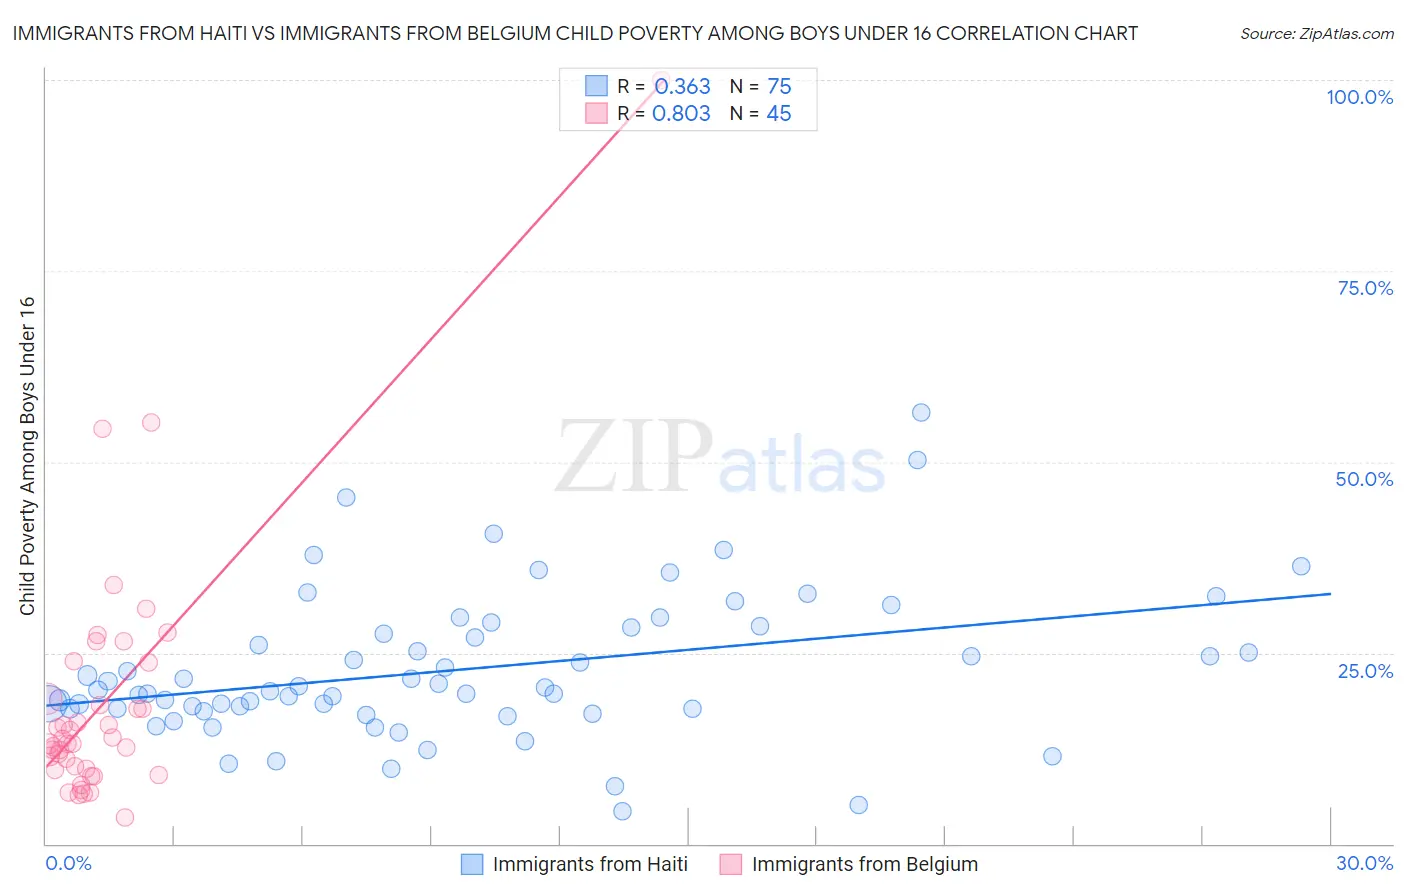 Immigrants from Haiti vs Immigrants from Belgium Child Poverty Among Boys Under 16